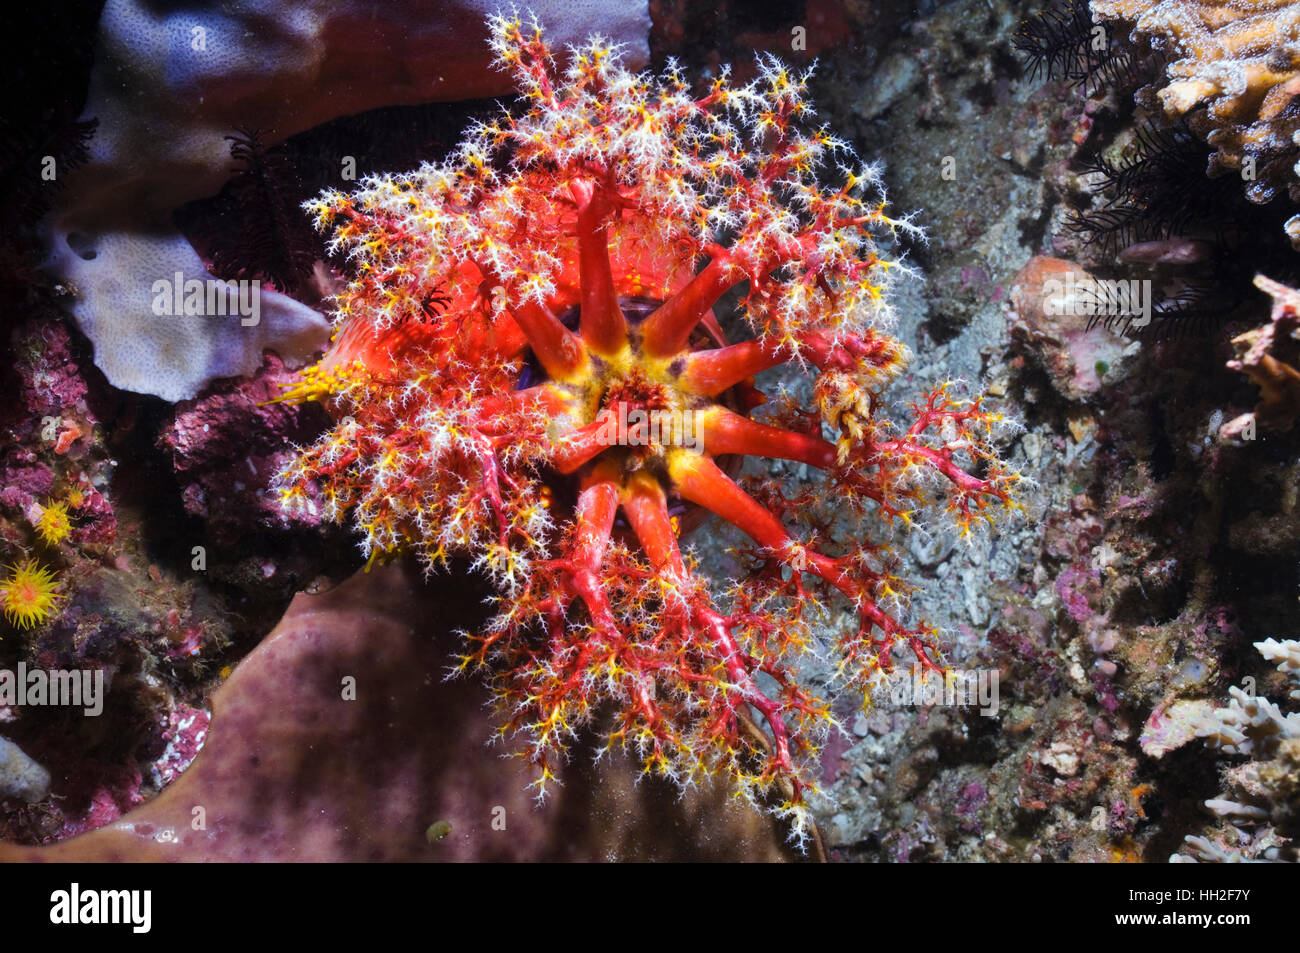 Sea apple (Pseudocolochirus violaceus), a sea cucumber, feeds by filtering the water column with its tentacular crown, successively bringing each arm Stock Photo